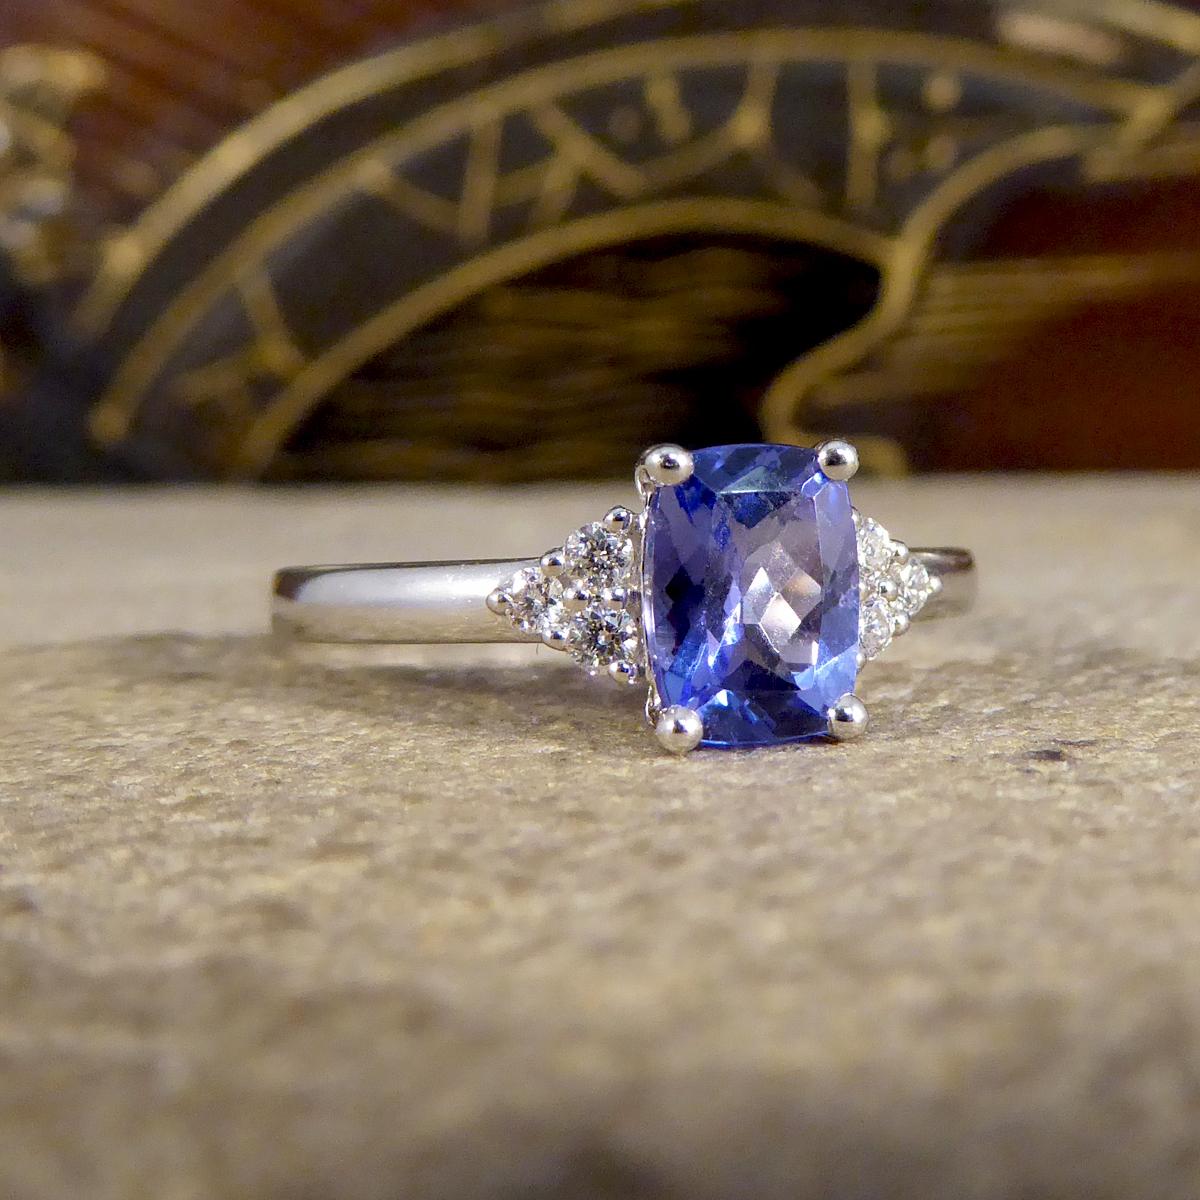 A very elegant ring that is holds a beautiful blue Cushion Cut Tanzanite in the centre that almost shows flashed of slight purple in different lights, such a gorgeous coloured stone. Either side of the gemstone sit three bright and clear round cut